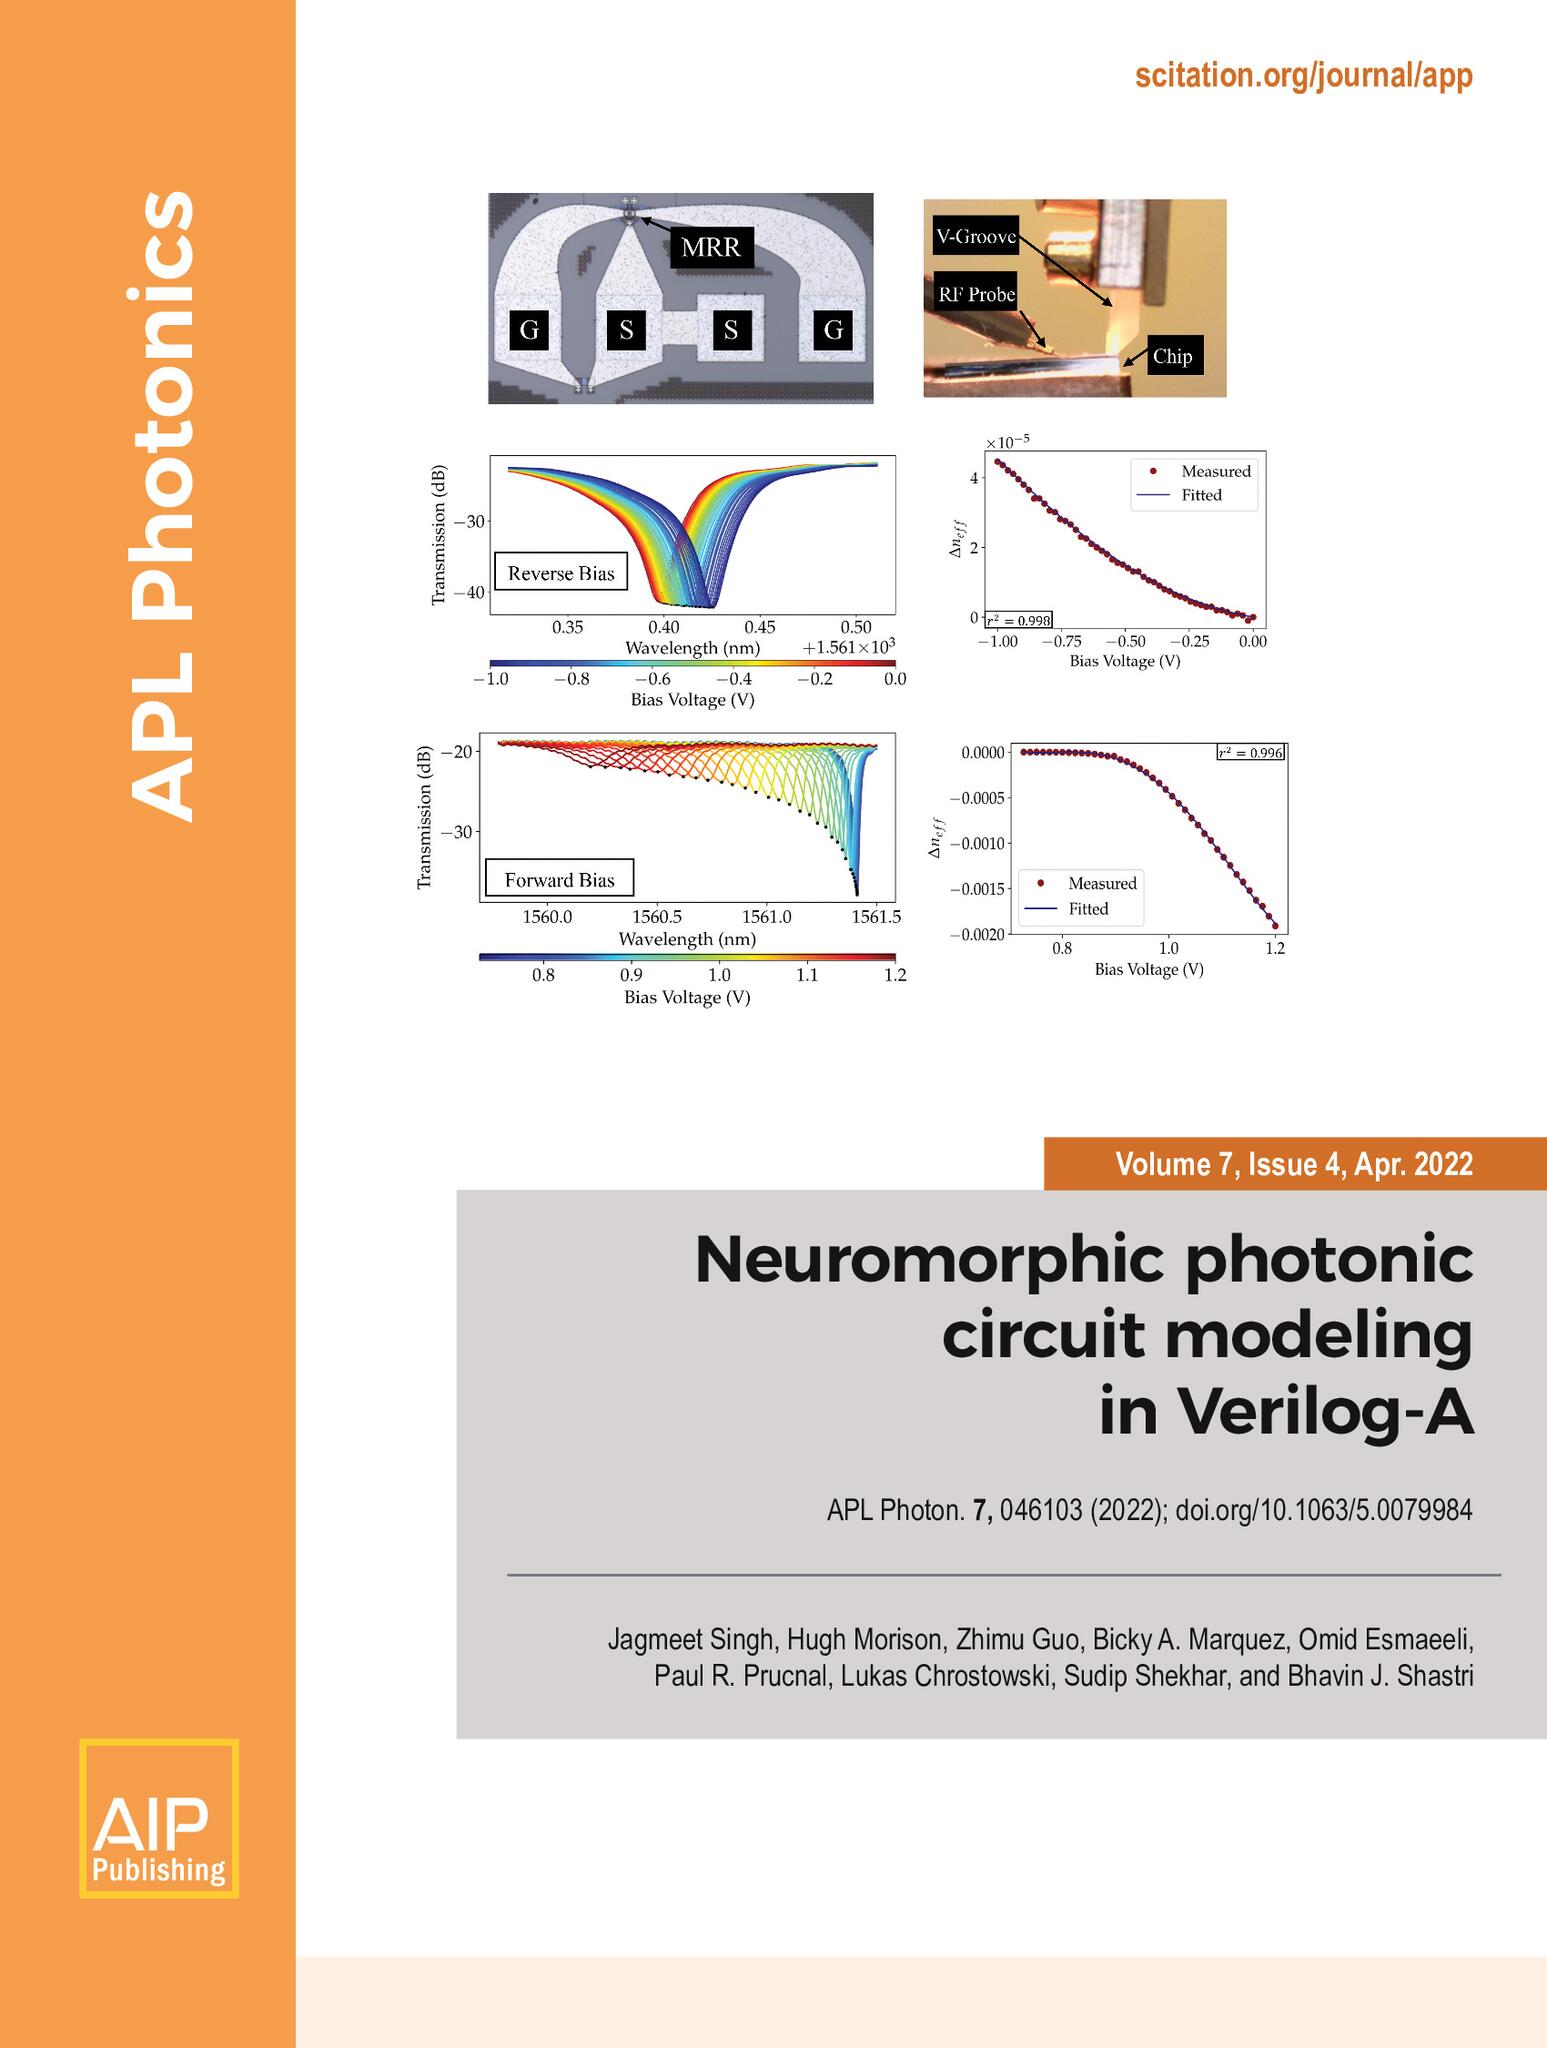 The paper has been published in APL Photonics and has been selected as the cover of the journal’s April 2022 issue.